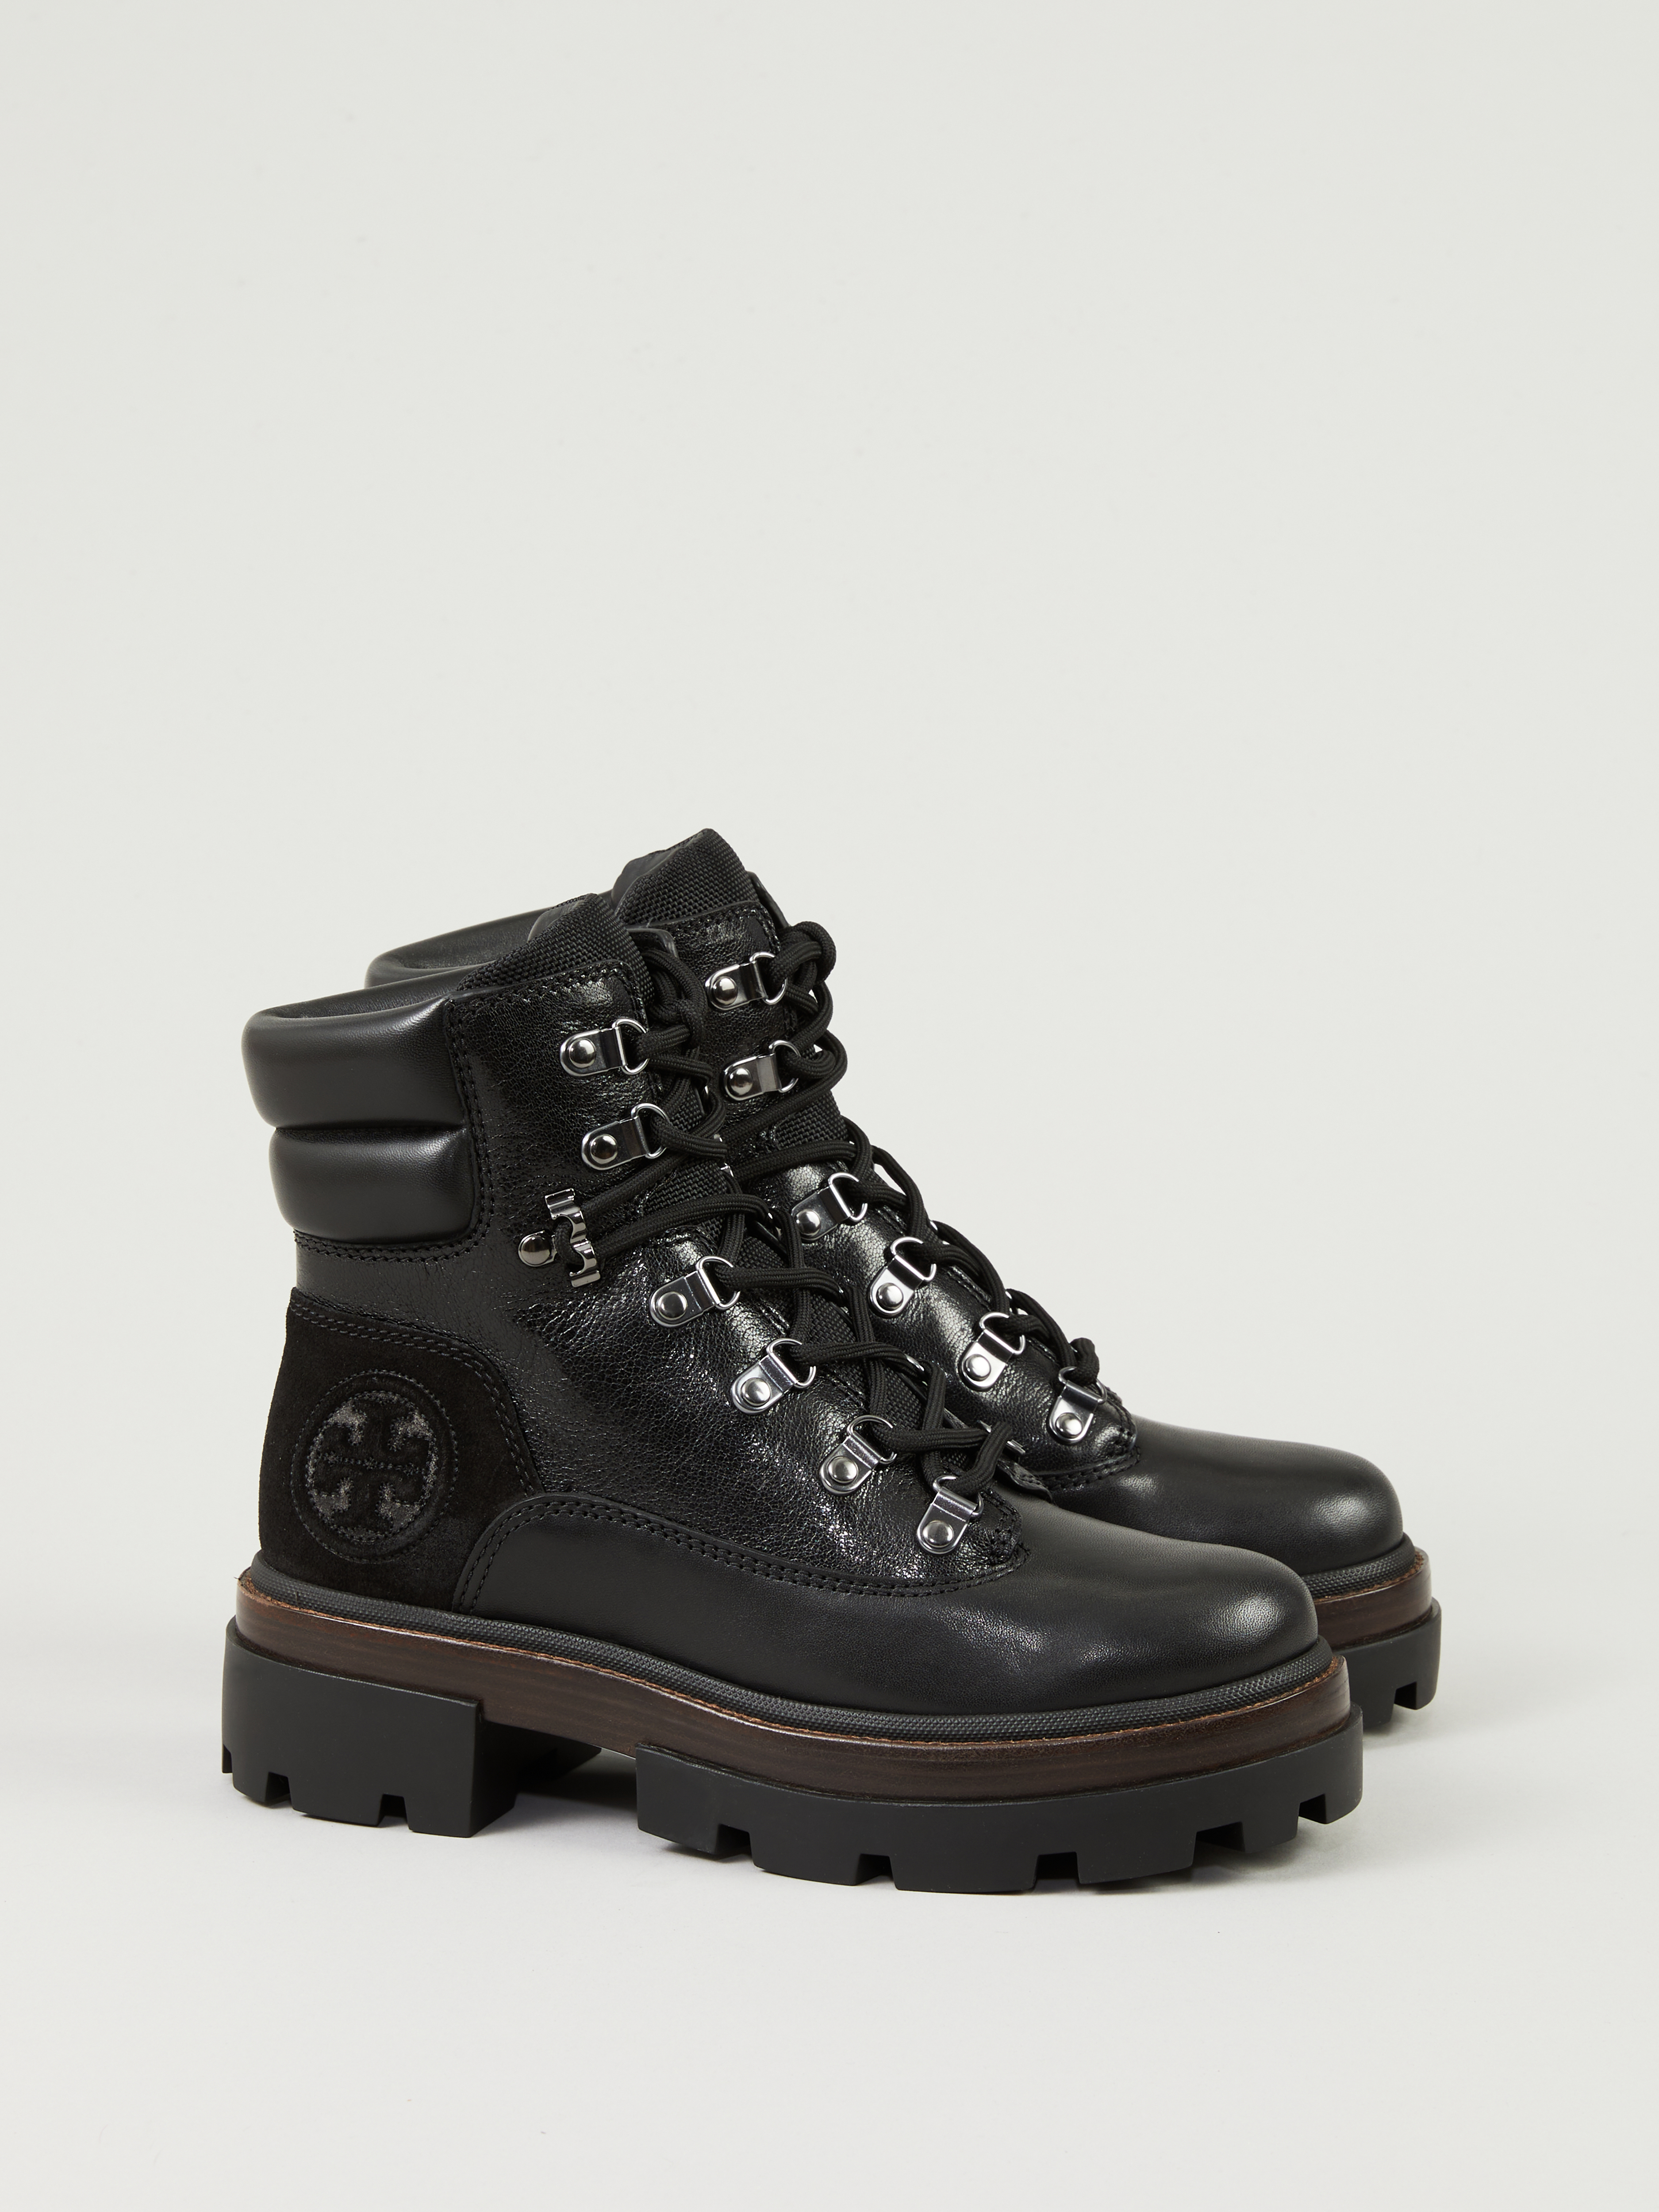 Tory Burch Boots 'Miller Lug Hiker' Black | Chelsea & Ankle Boots